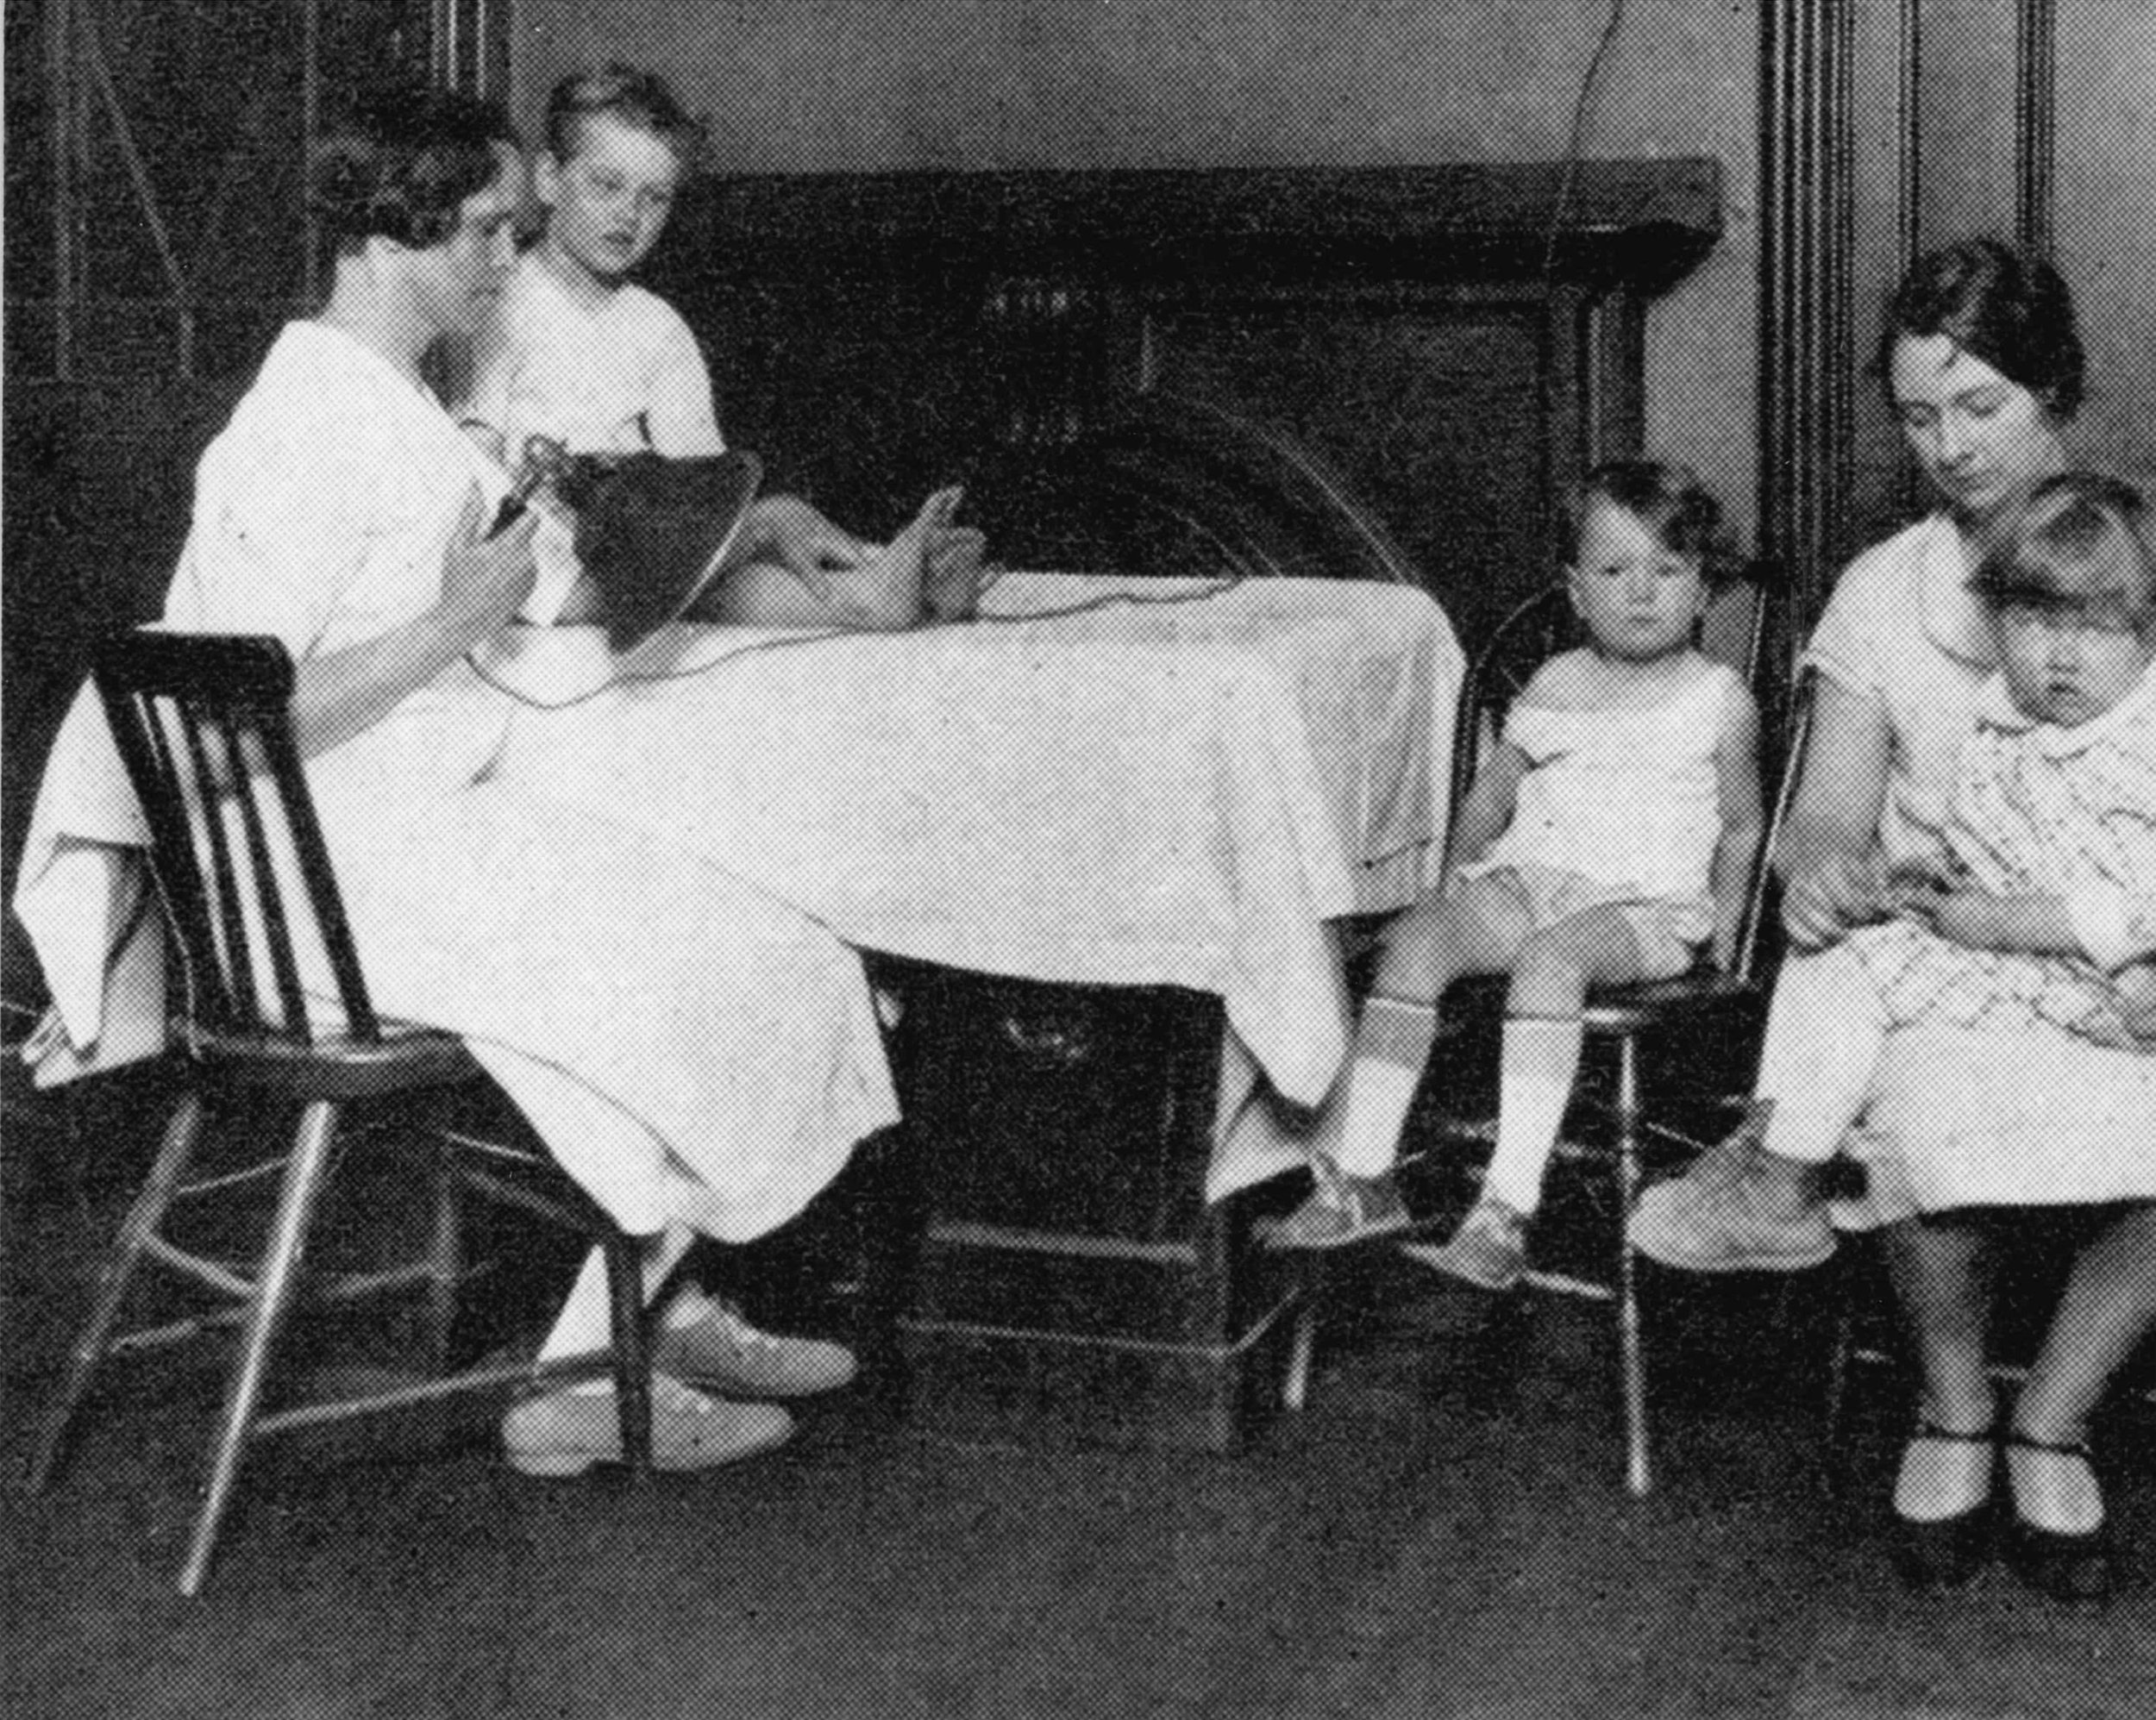 The Avon Home ran a Polio Clinic from 1917 to 1940